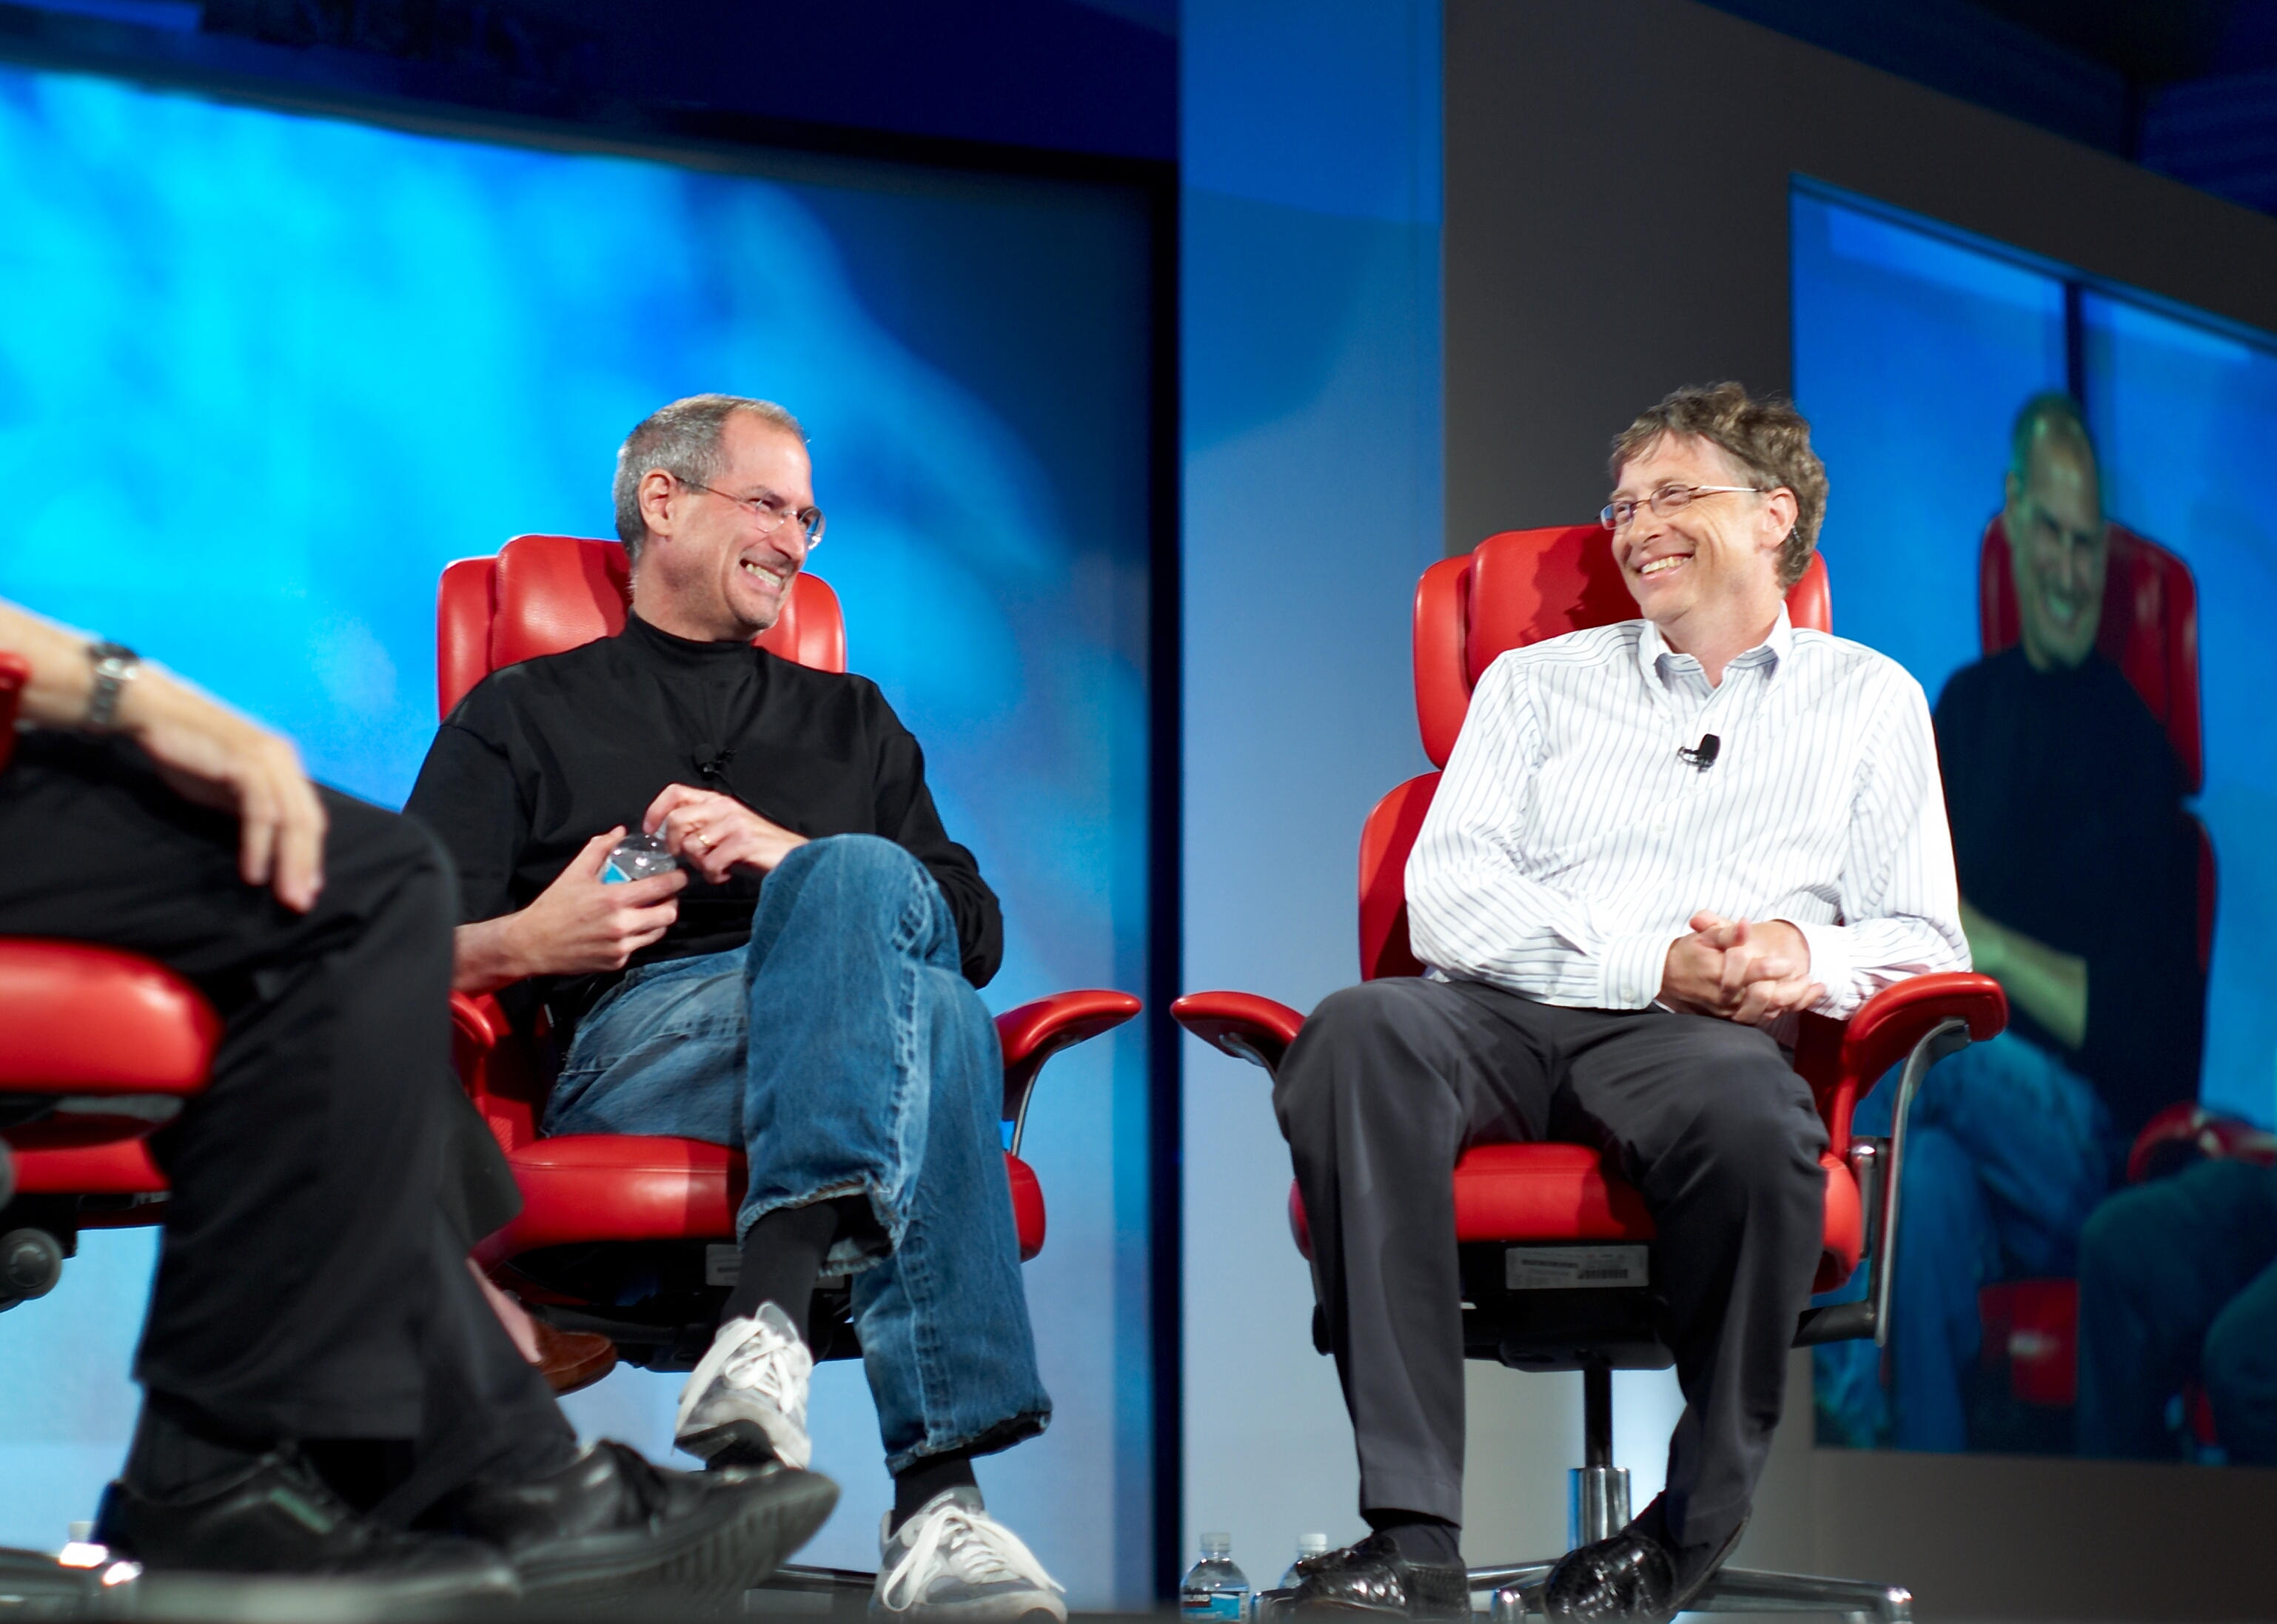 Steve Jobs and Bill Gates at 'D5 -All Things Digital' conference, Silicon Valley, May 31, 2007.